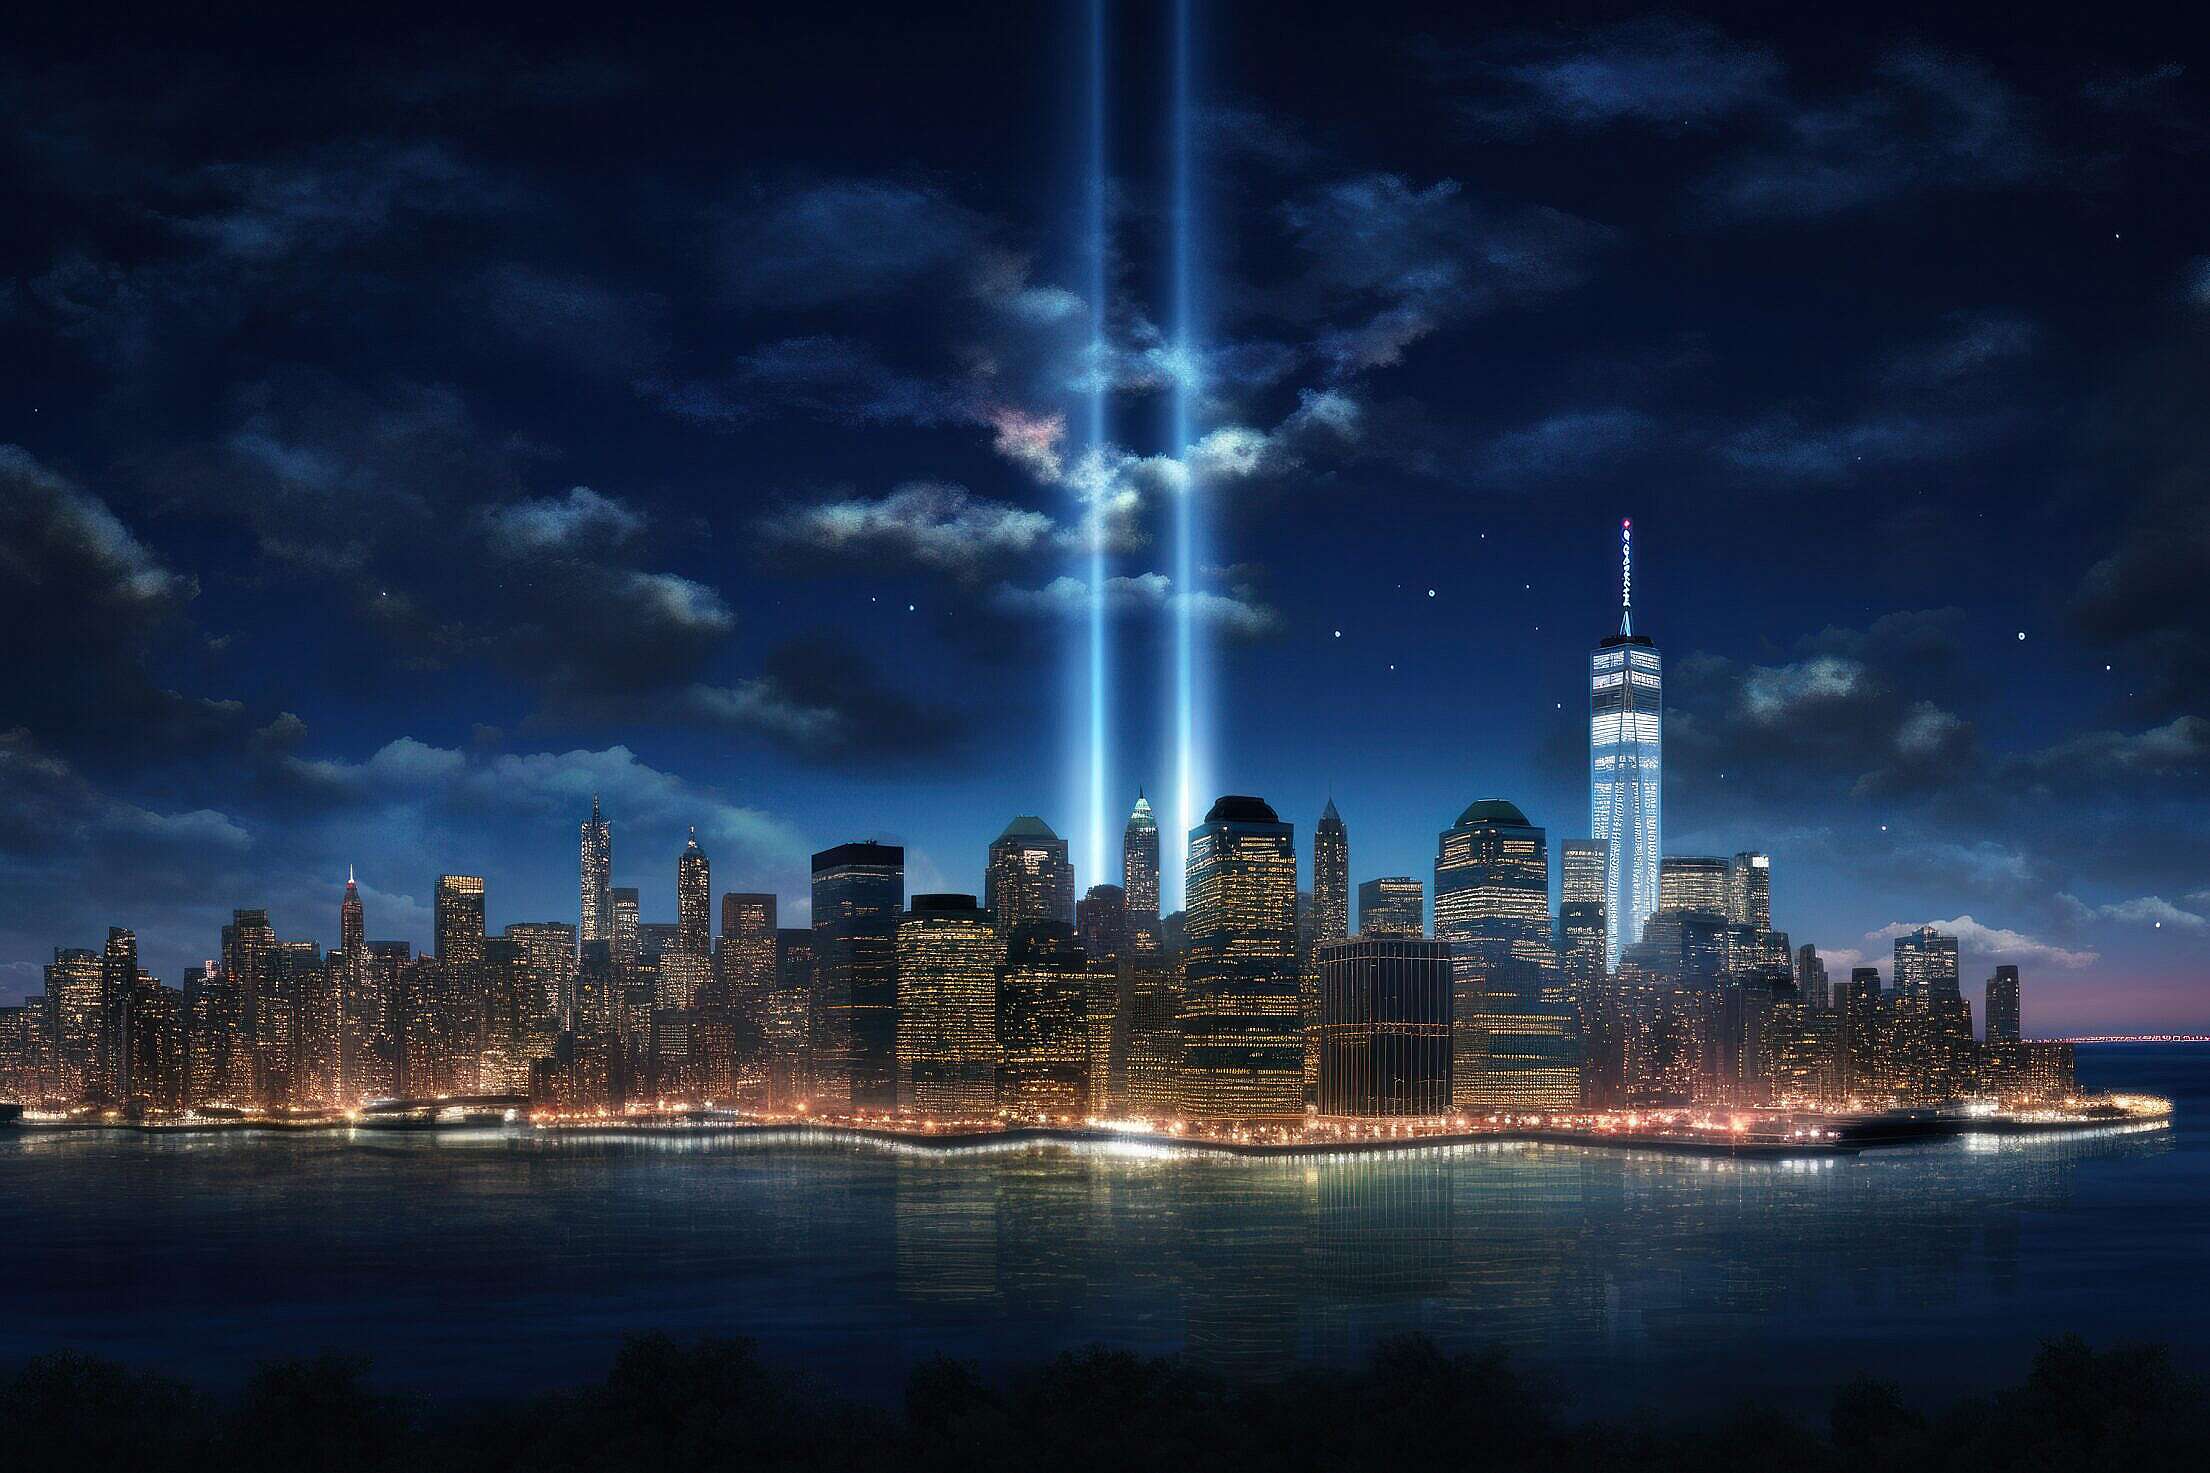 911 Attacks Memorial Lights Beams In Night Sky Over Nyc Free Photo 2210x1473 